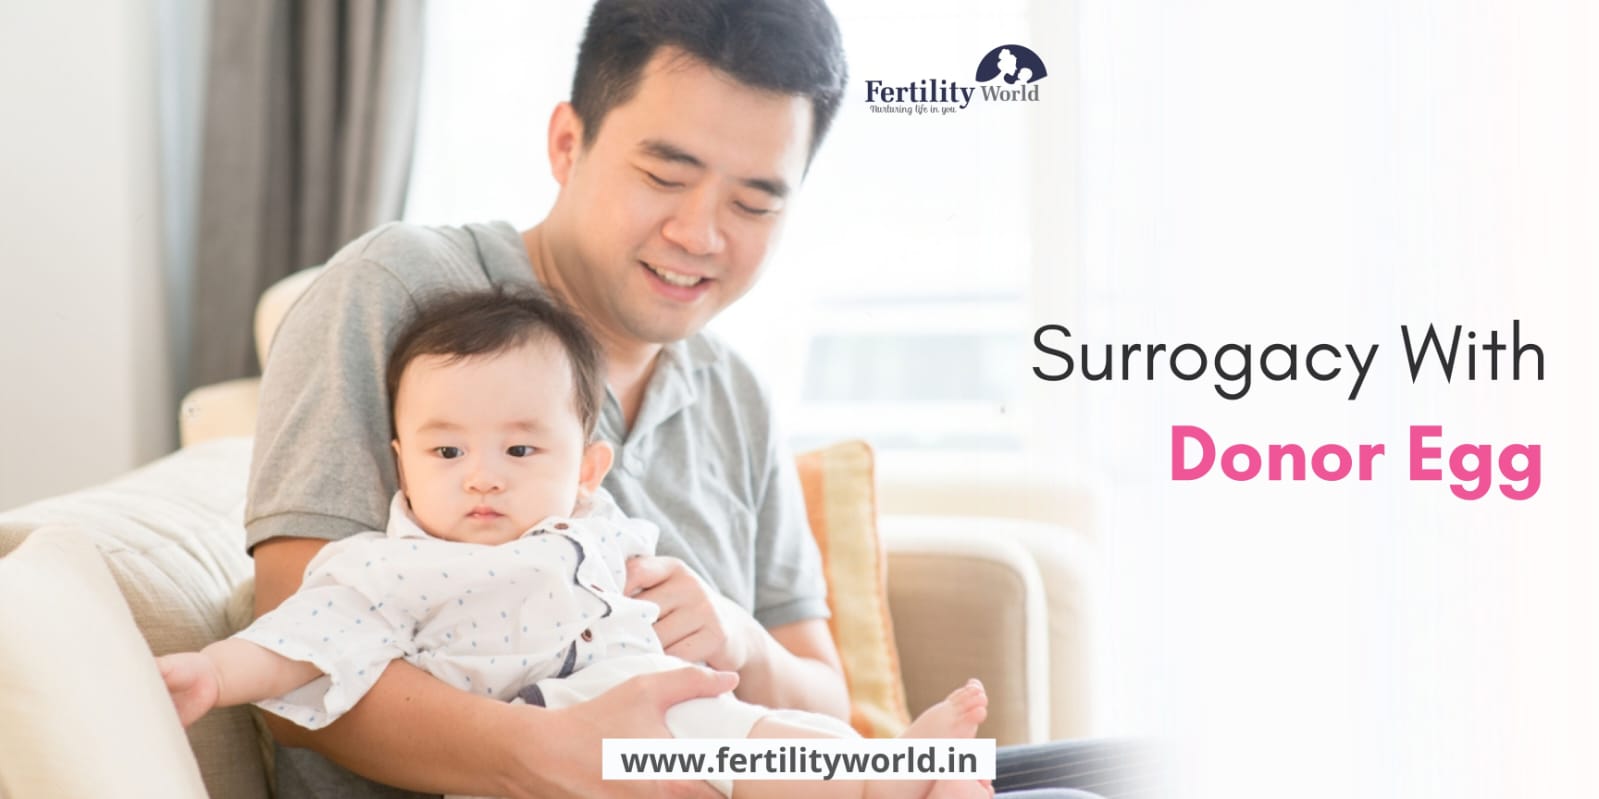 Cost of surrogacy with Donor Egg, Philippines